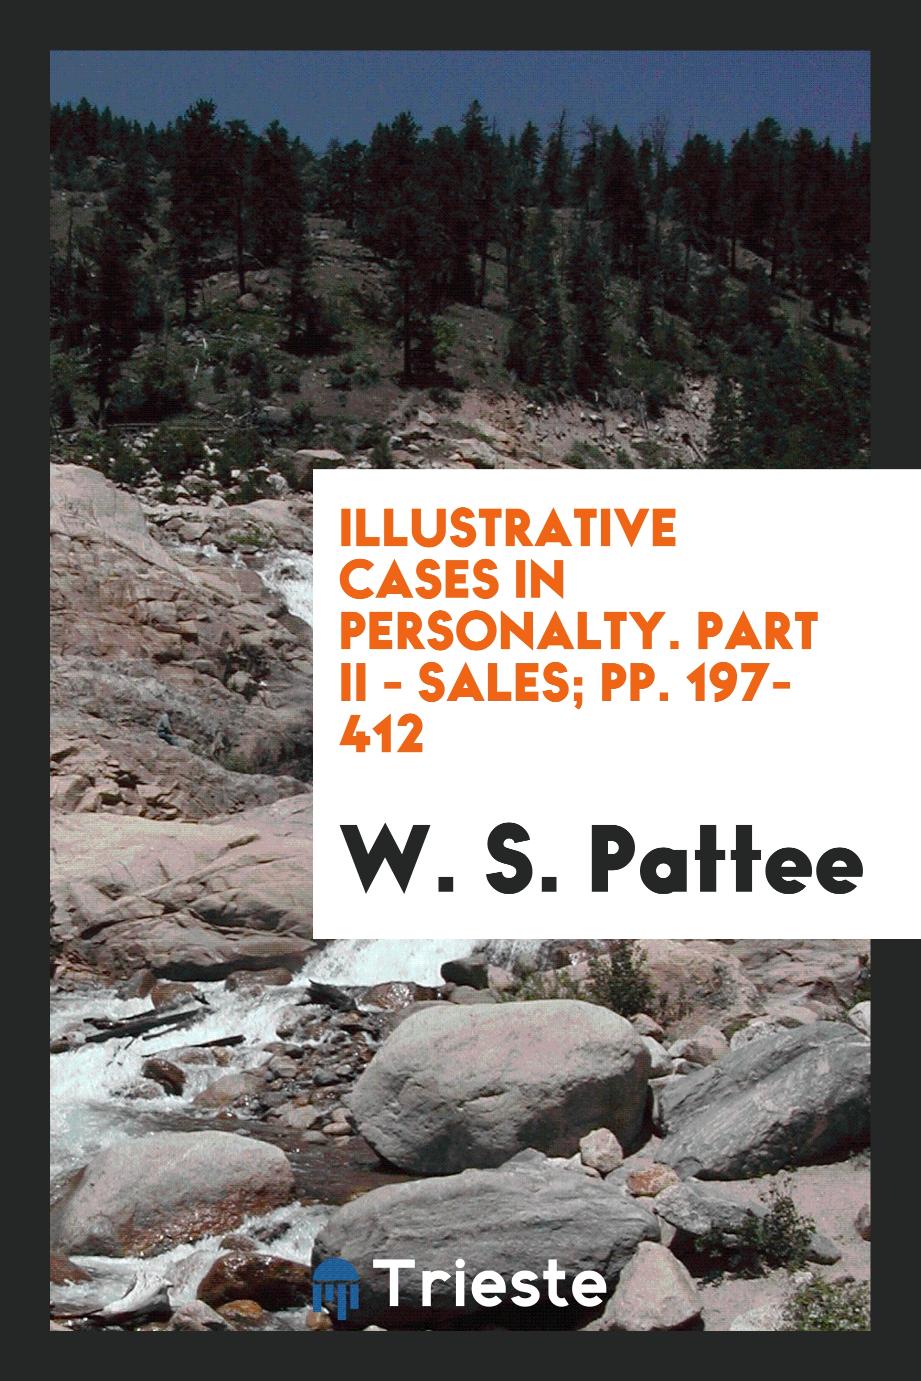 Illustrative Cases in Personalty. Part II - Sales; pp. 197-412